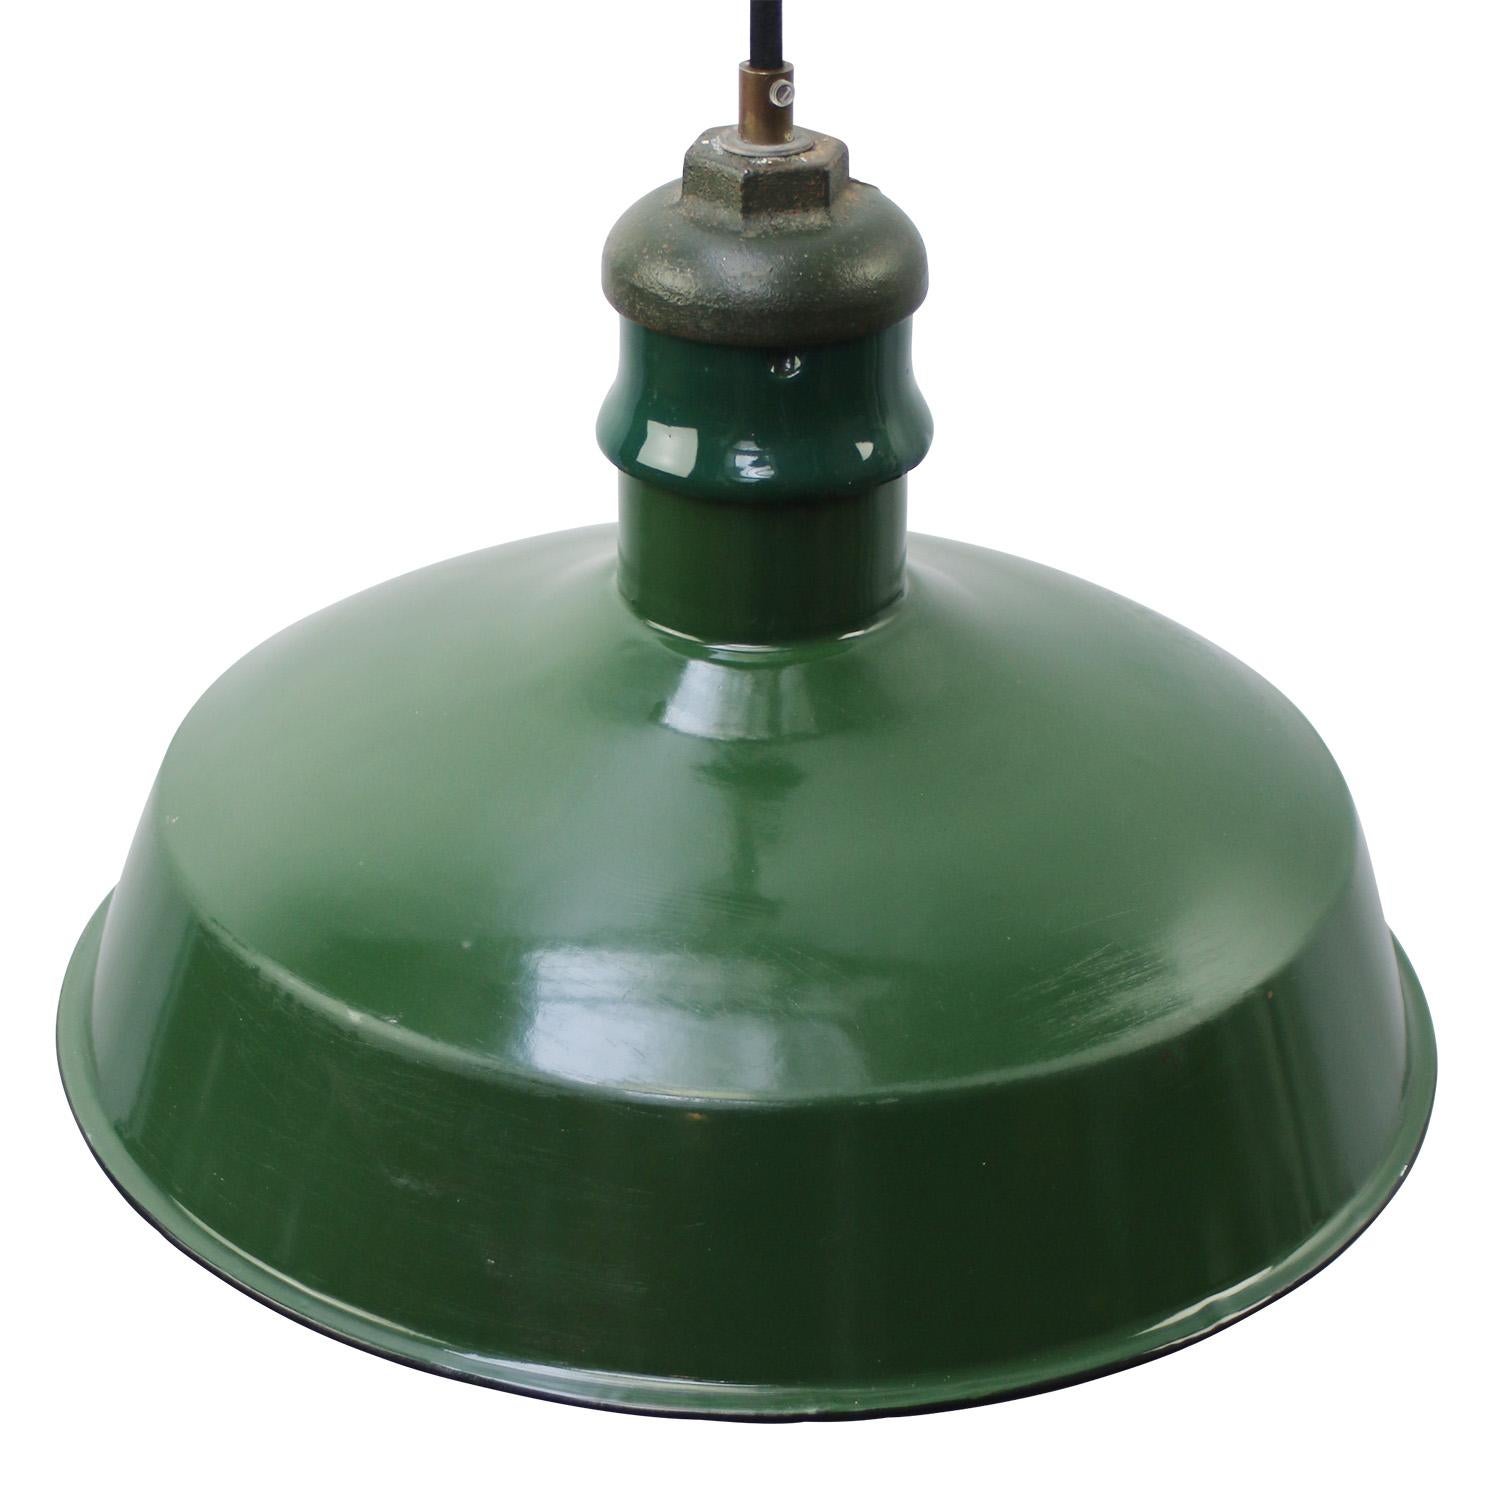 Vintage American green enamel industrial pendant lamp
Cast iron top, white interior

Weight: 1.60 kg / 3.5 lb

Priced per individual item. All lamps have been made suitable by international standards for incandescent light bulbs, energy-efficient